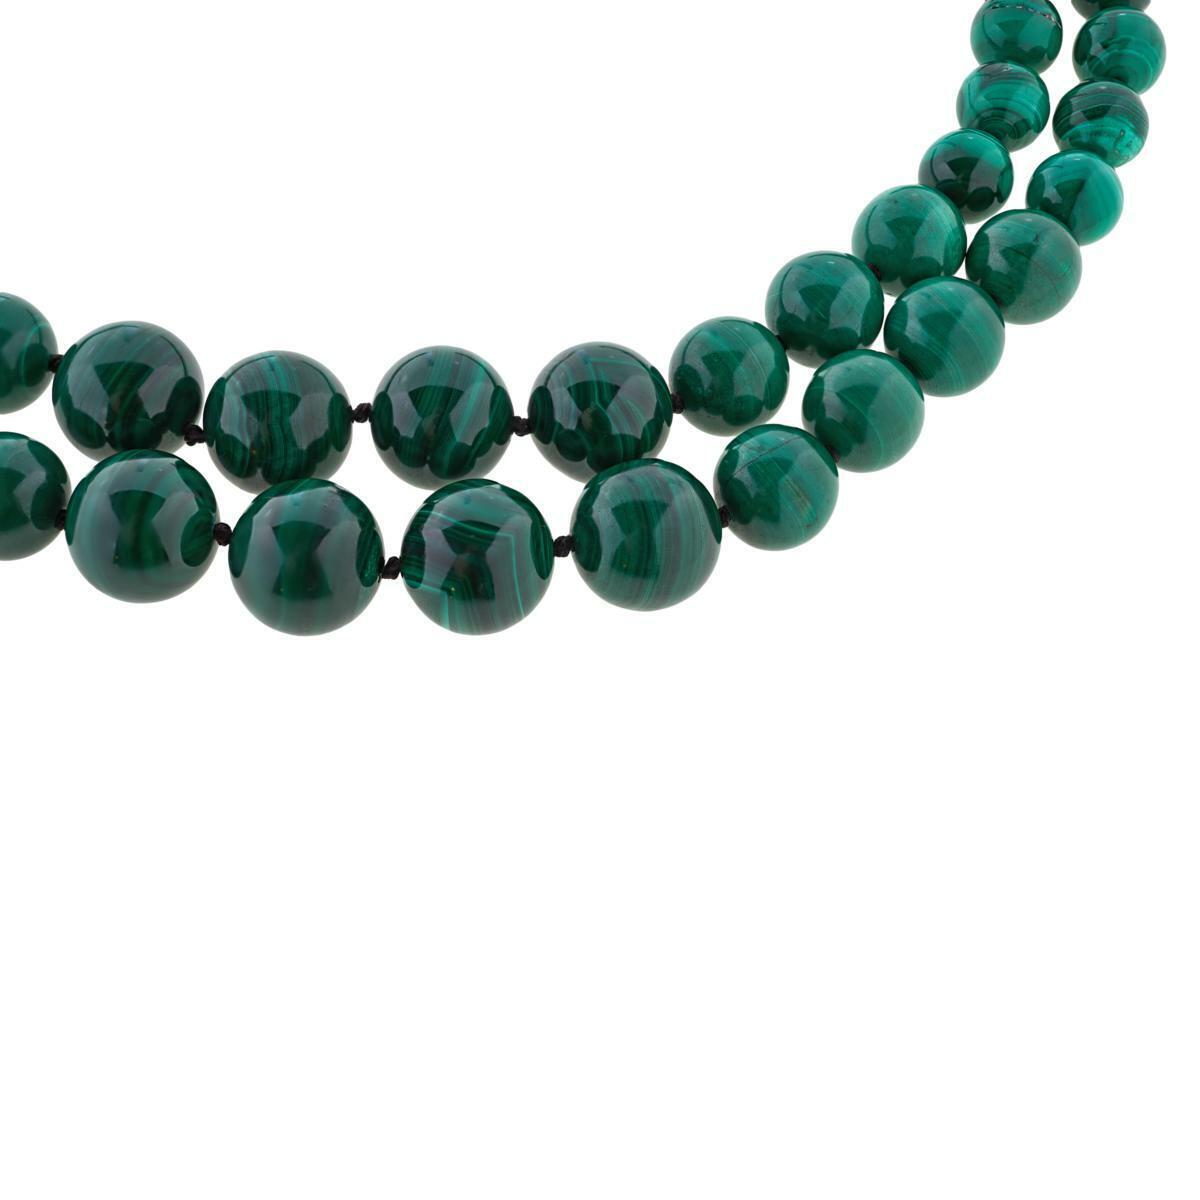 Rarities Malachite Bead Graduated 2-Strand Necklace with Toggle Clasp